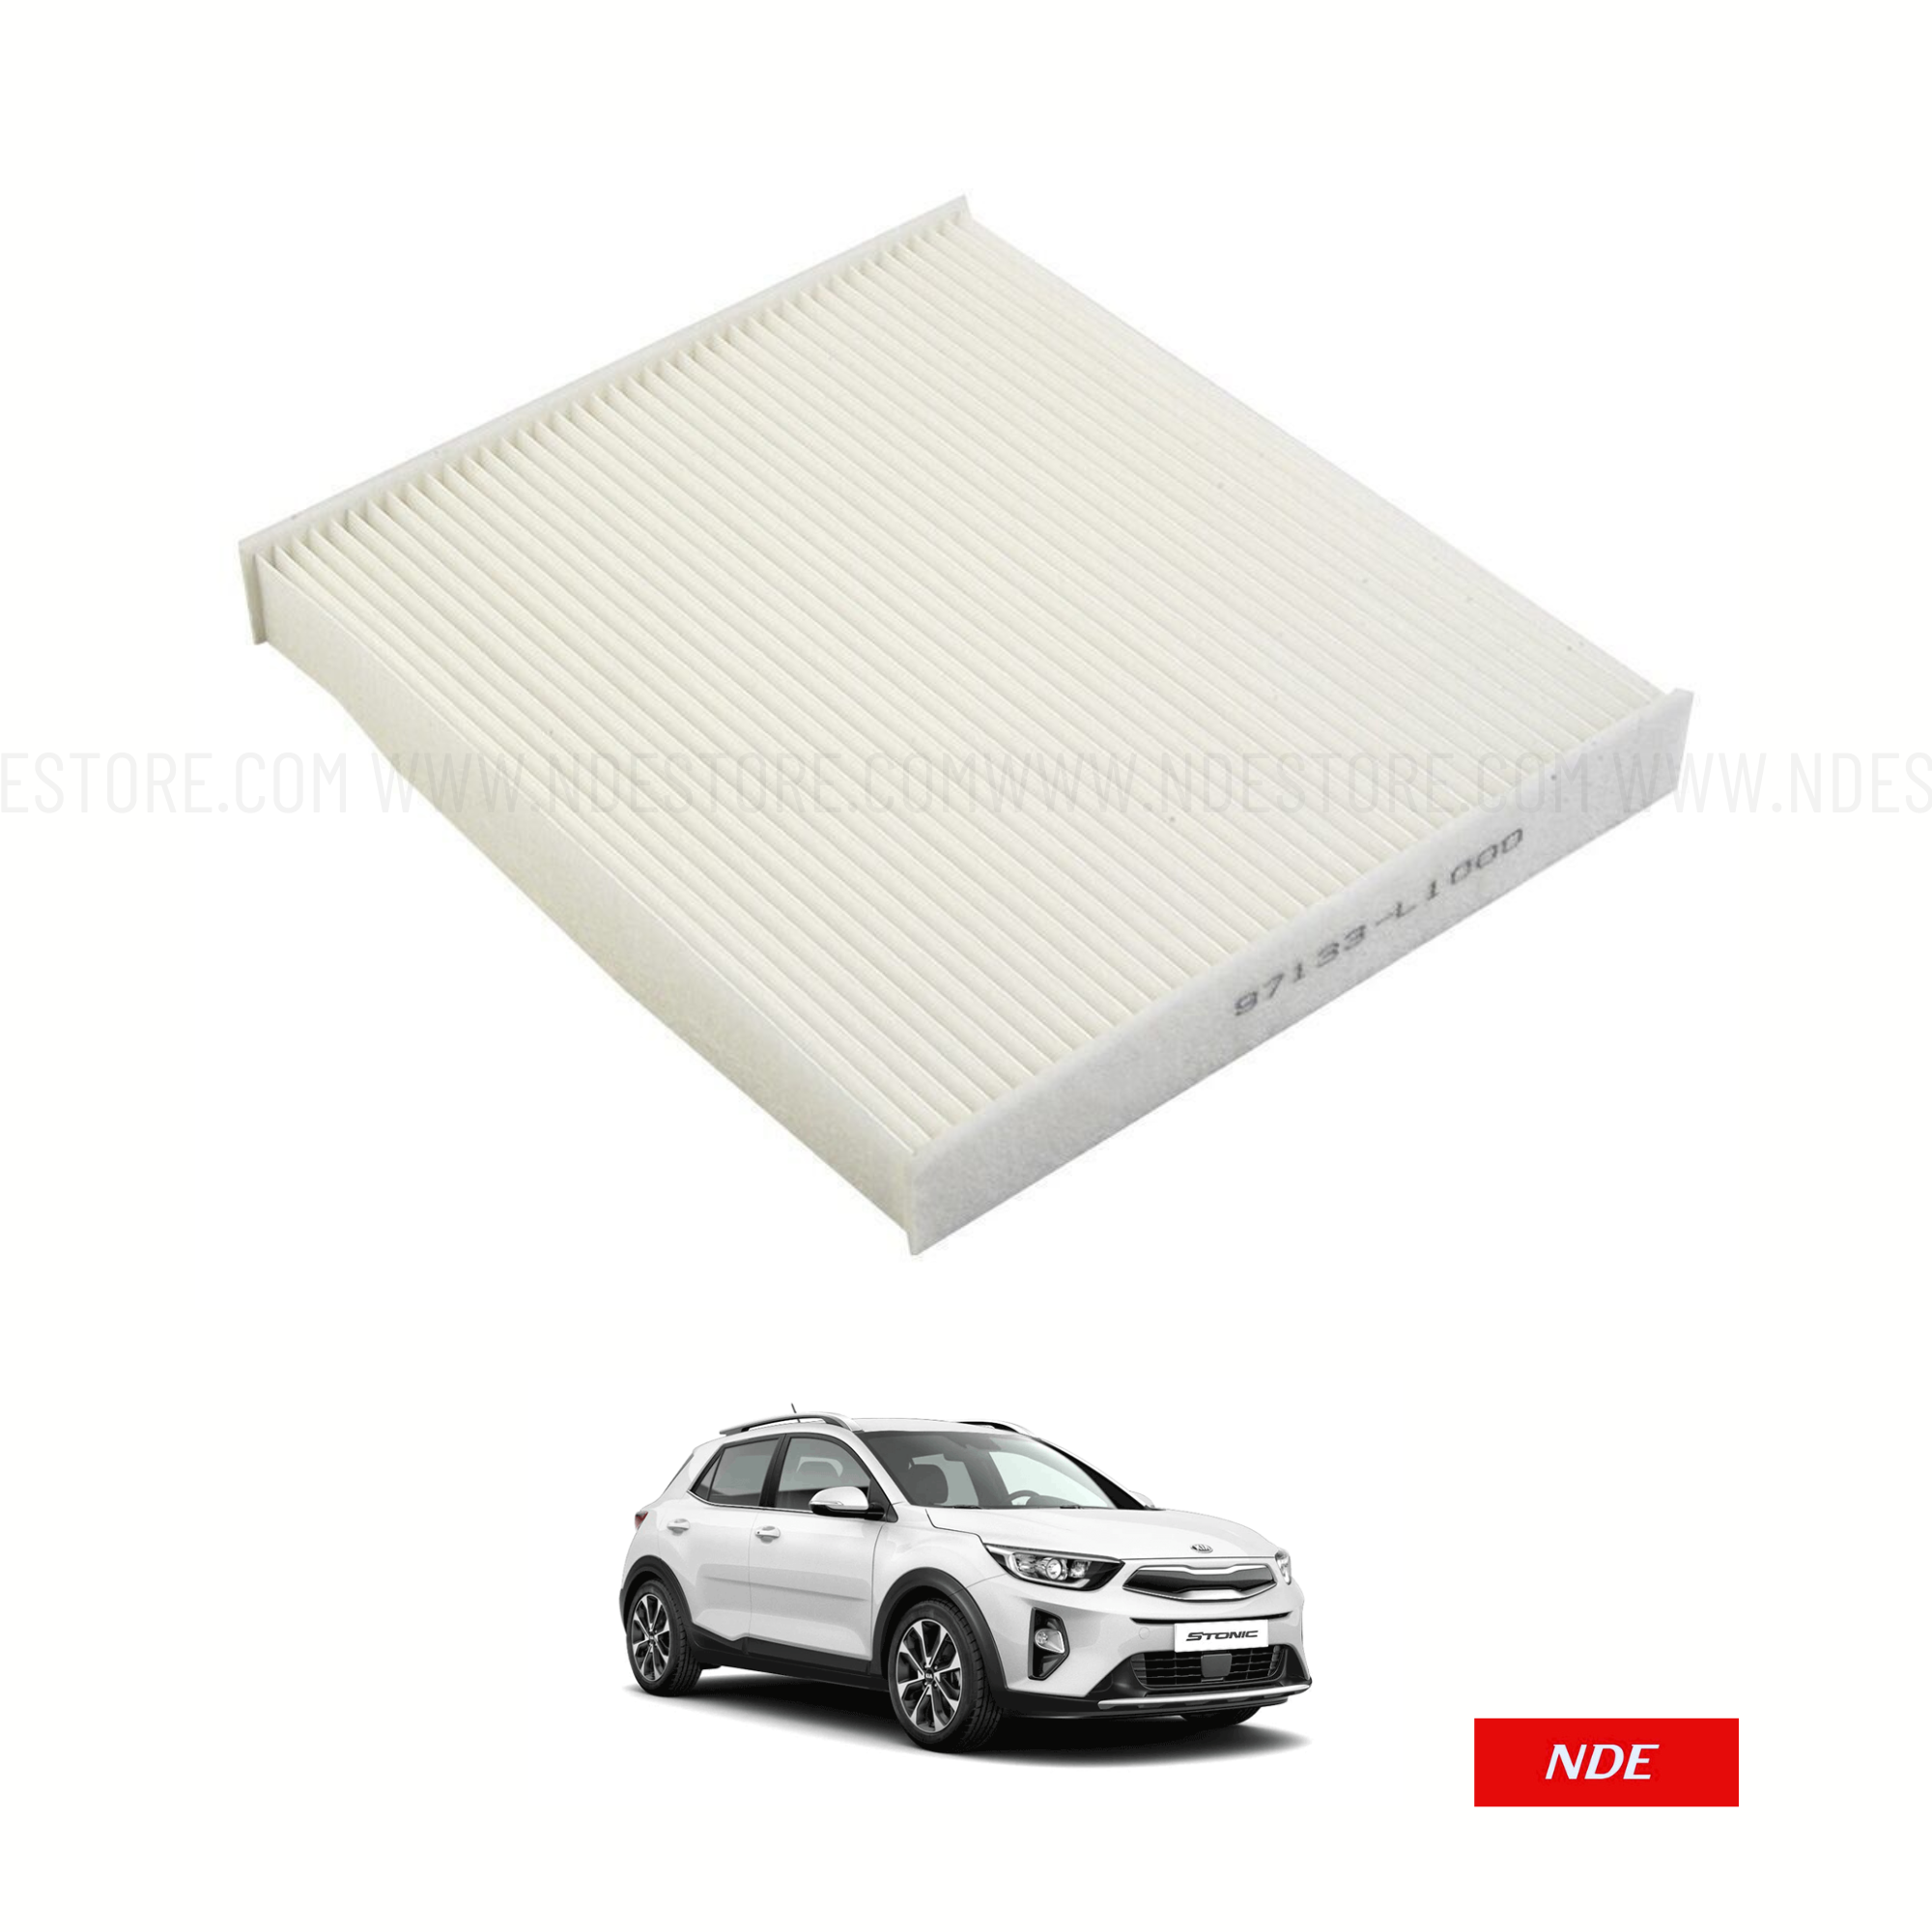 CABIN AIR FILTER / AC FILTER IMPORTED FOR KIA STONIC